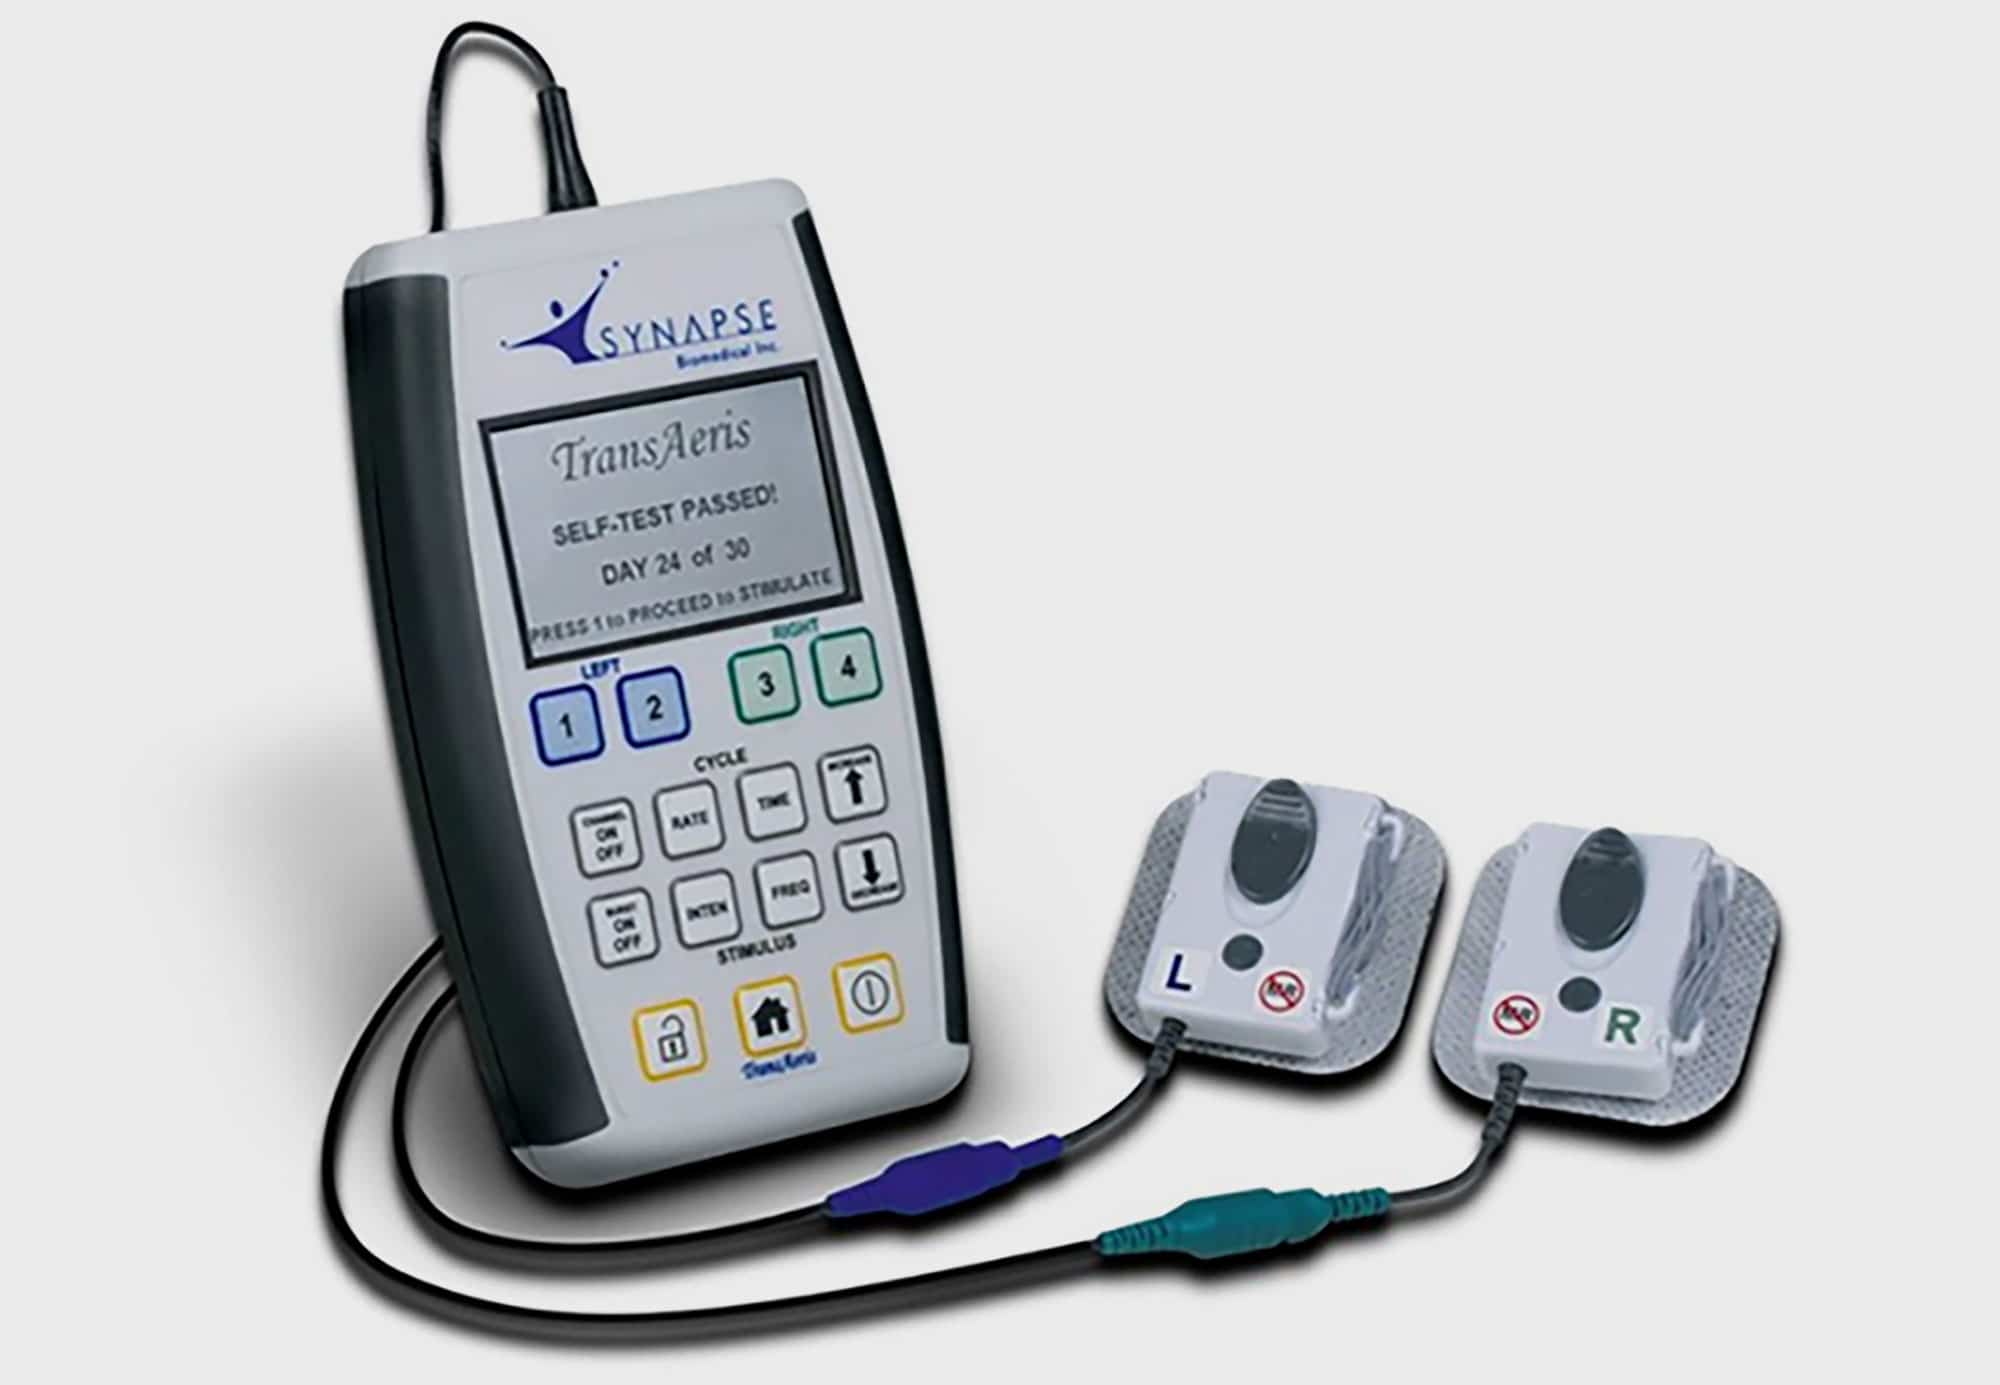 Screen printers around the world are producing biosensors and other medical devices similar to this. They hold the key to rapid and inexpensive testing for COVID-19, diabetes, and many other medical conditions.